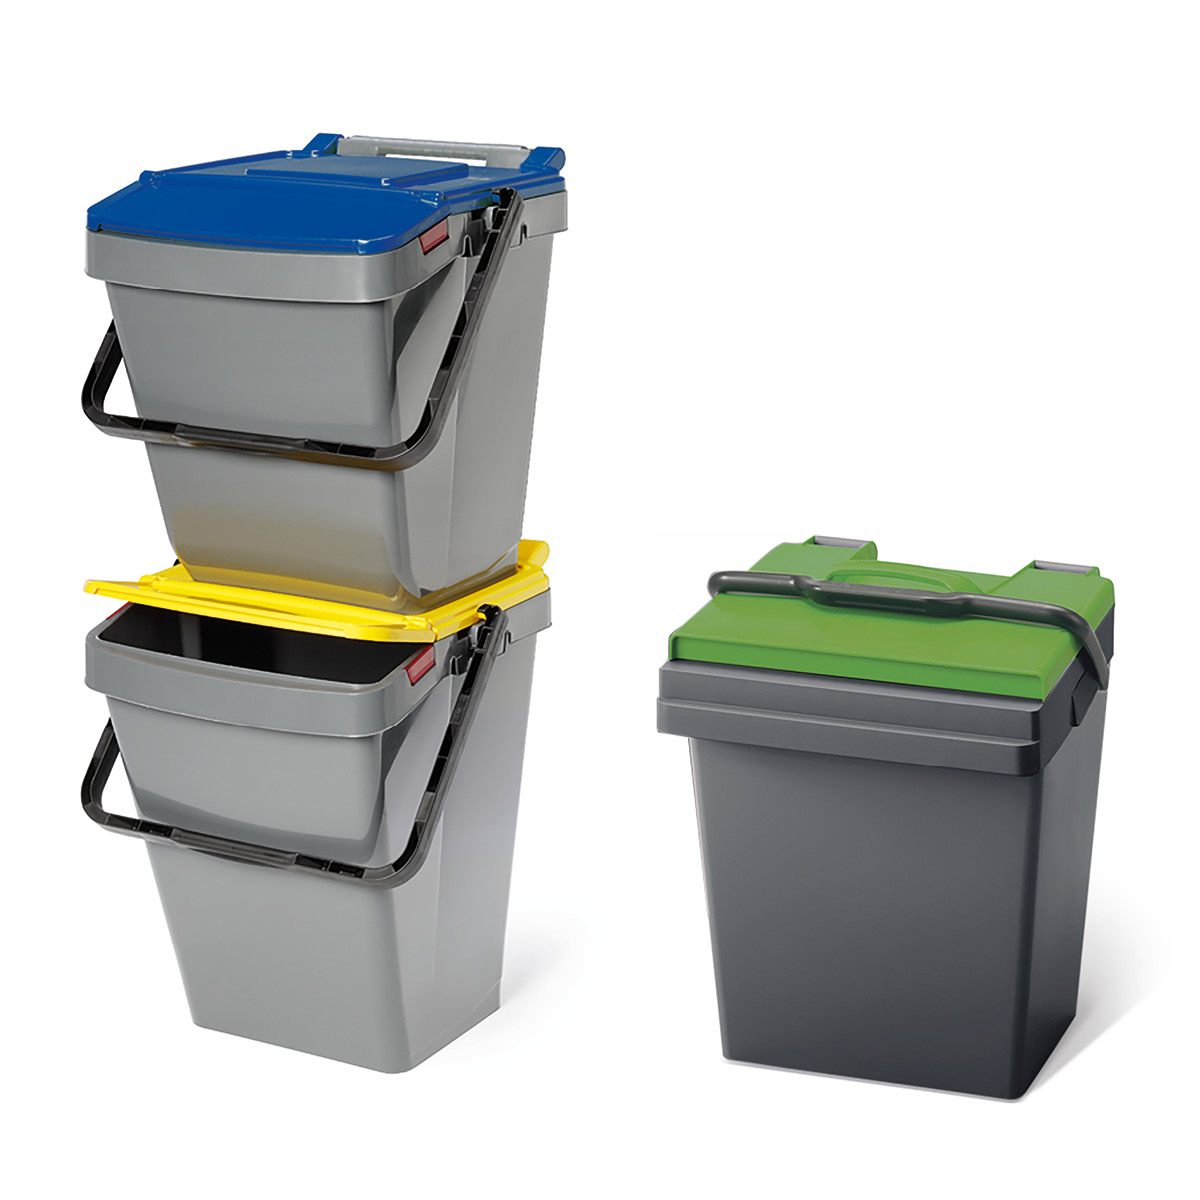 MINIMAX: Pioneering presorted waste collection  in Italy